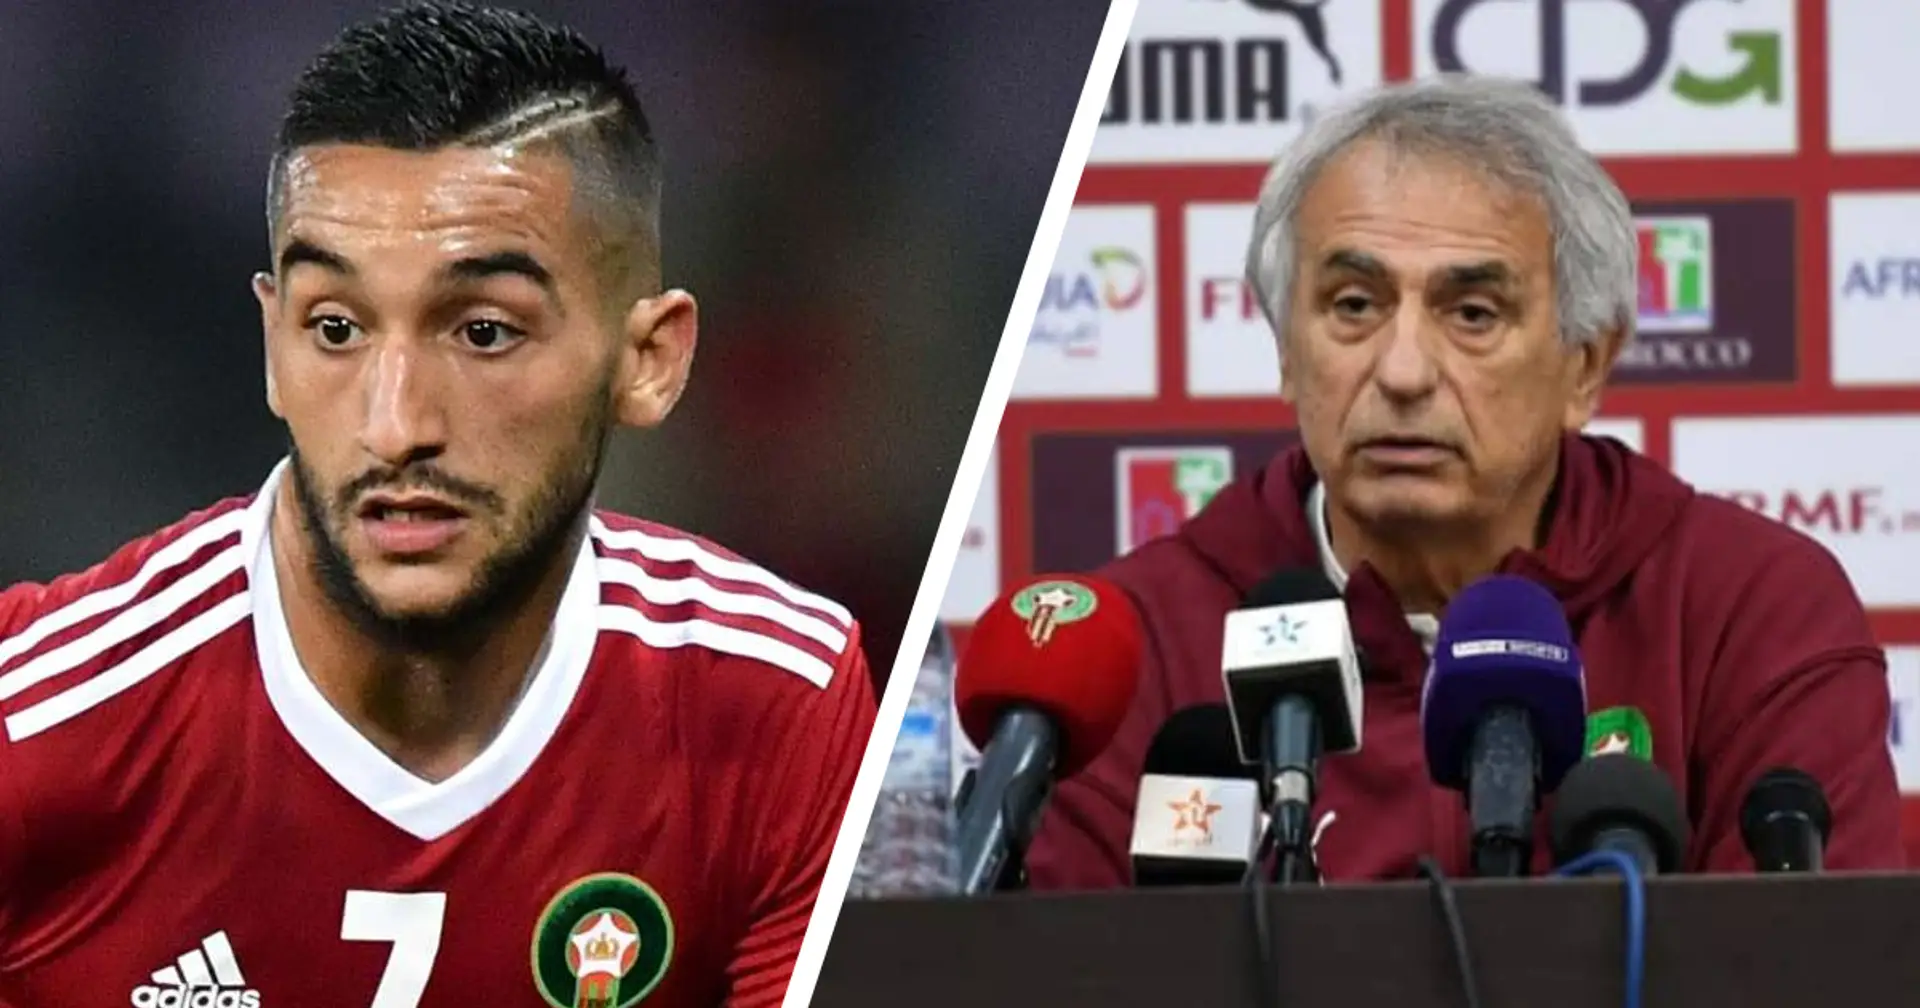 'I will not tolerate his behaviour': Morocco coach Halilhodžić blasts Ziyech, explains leaving him out of squad